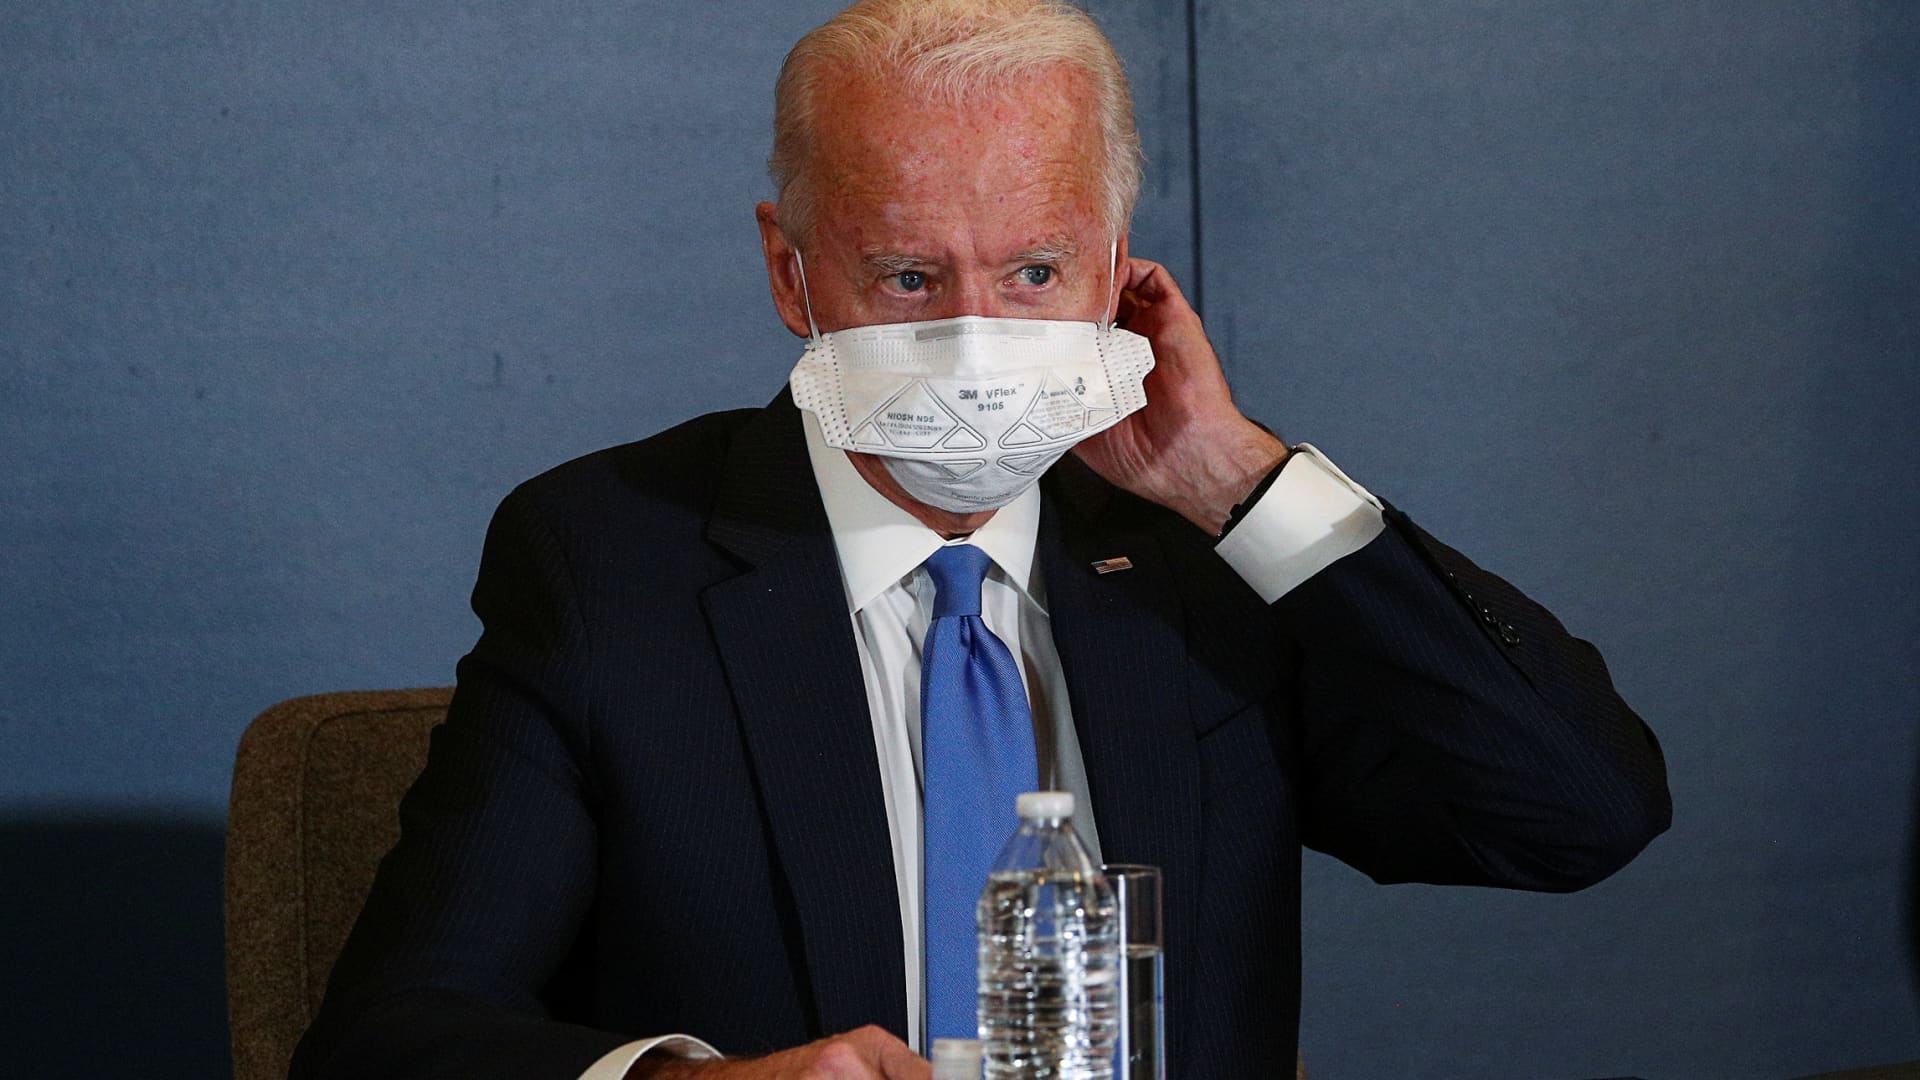 U.S. President-elect Joe Biden removes his face mask as he meets with Speaker of the House Nancy Pelosi (D-CA) and Senate Minority Leader Chuck Schumer (D-NY) at his transition headquarters in the Queen theater in Wilmington, Delaware, U.S., November 20, 2020.